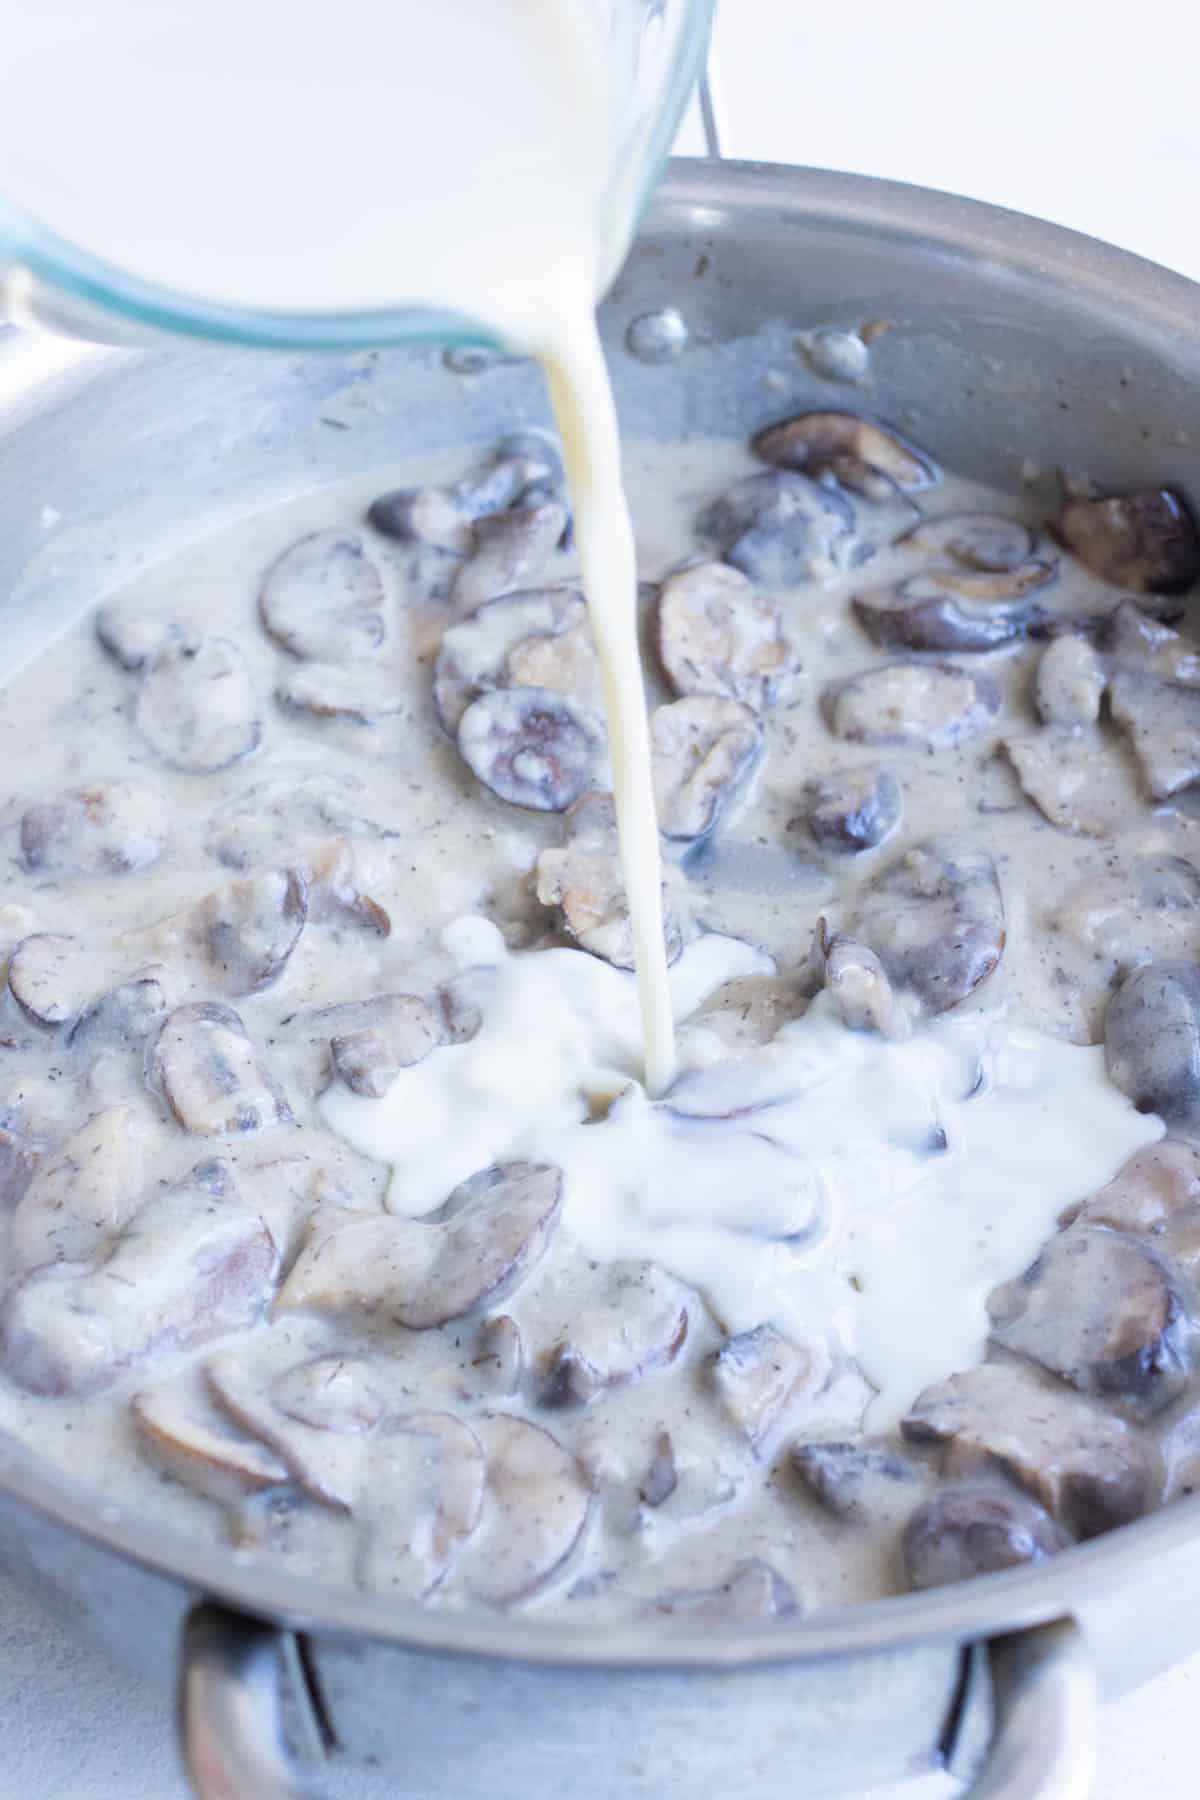 Milk is added to mushrooms and broth.